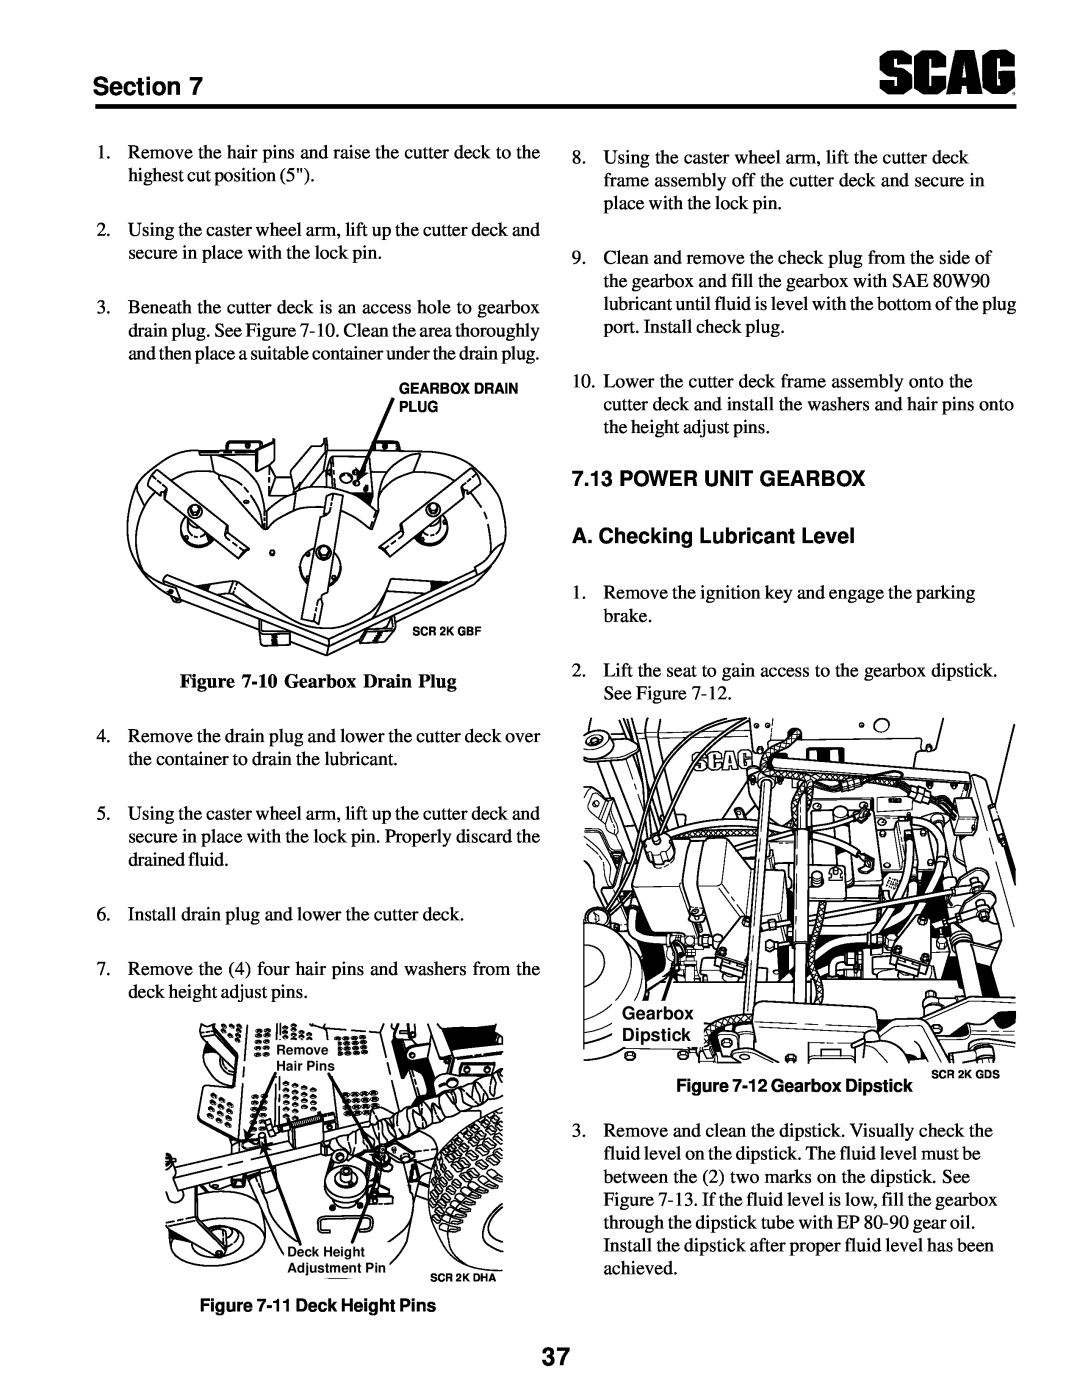 MB QUART SCR manual POWER UNIT GEARBOX A. Checking Lubricant Level, Section, 10 Gearbox Drain Plug 